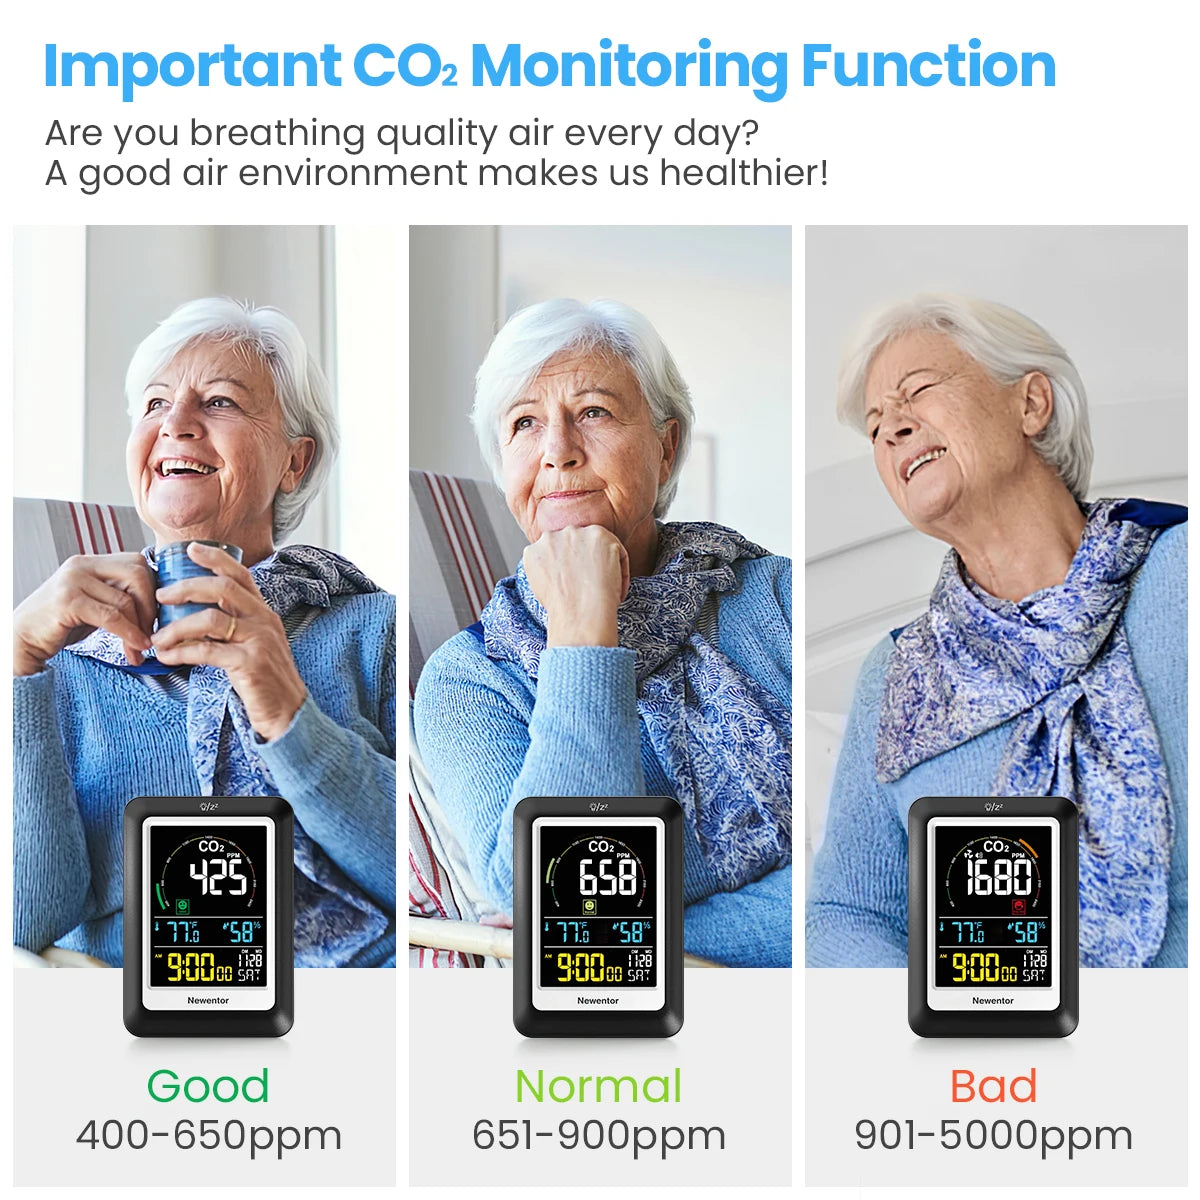 Newentor 5 in 1 Air Quality Monitor Multifunctional Real-time Dectect Carbon Dioxide Meter Digital Temperature Humidity Sensor